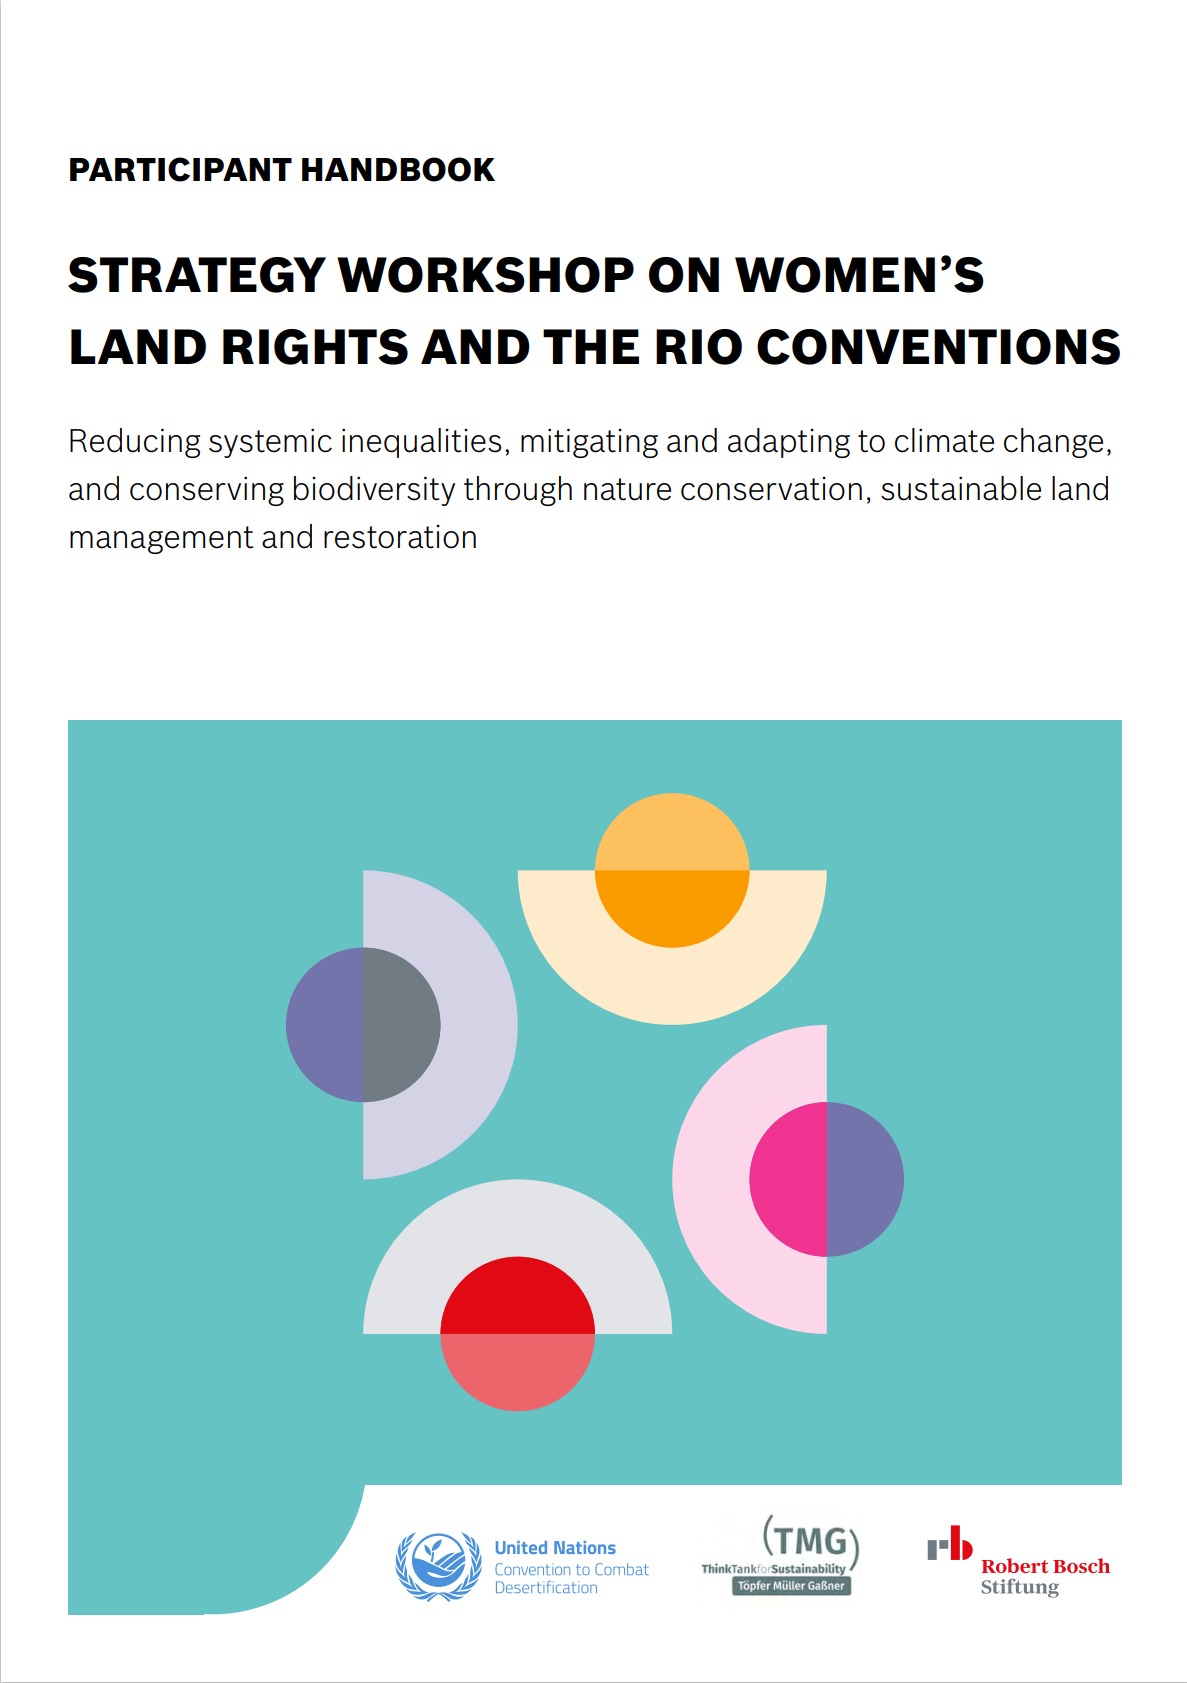 Participant Handbook: Strategy Workshop on Women's Land Rights and the Rio Conventions   